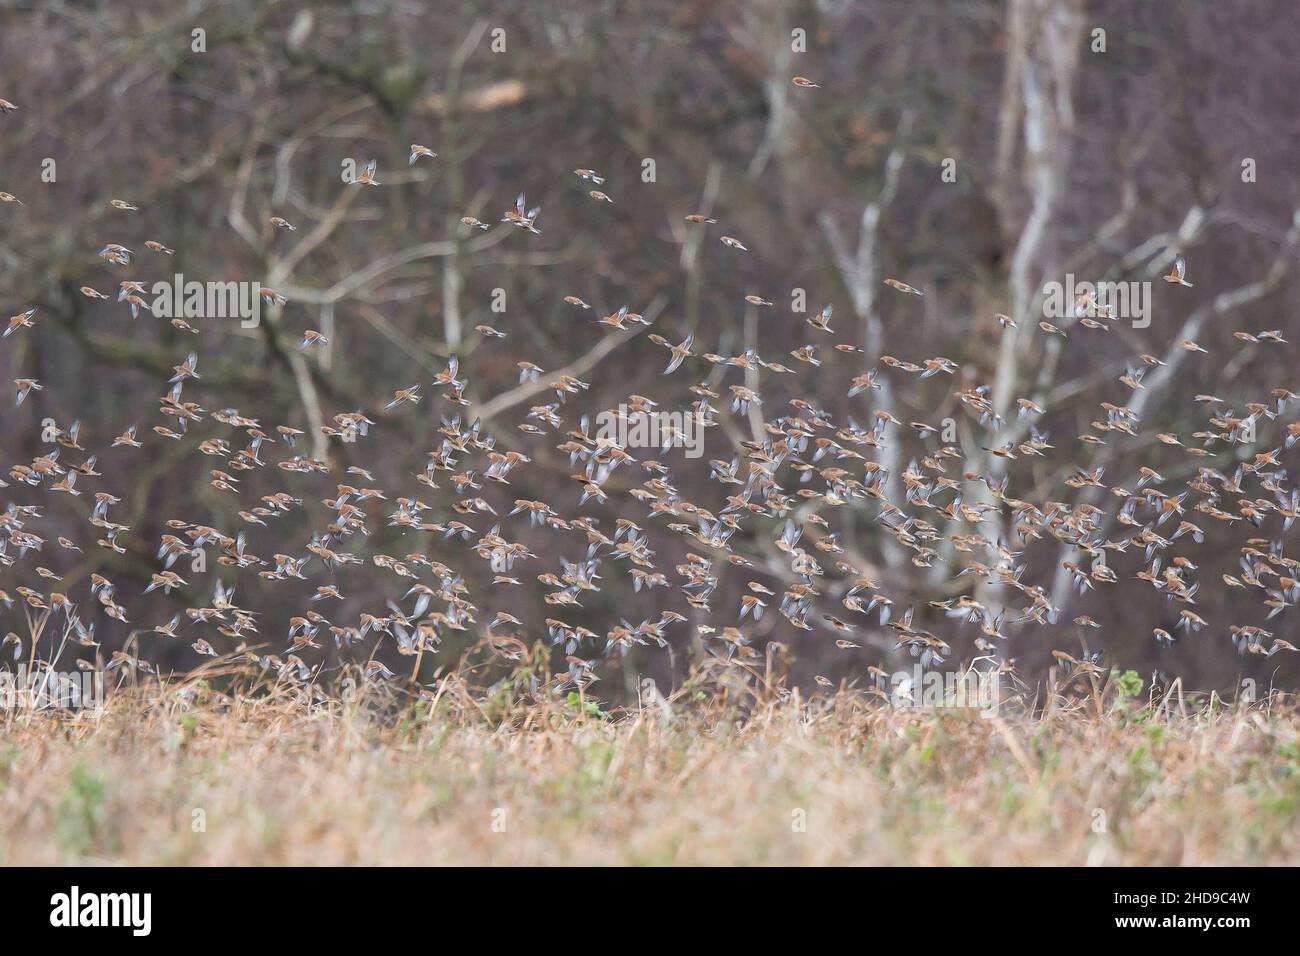 Large flock of wild UK linnet birds (Linaria cannabina) in midair flight, flying closely together, rising up from rural, open farmland. Stock Photo